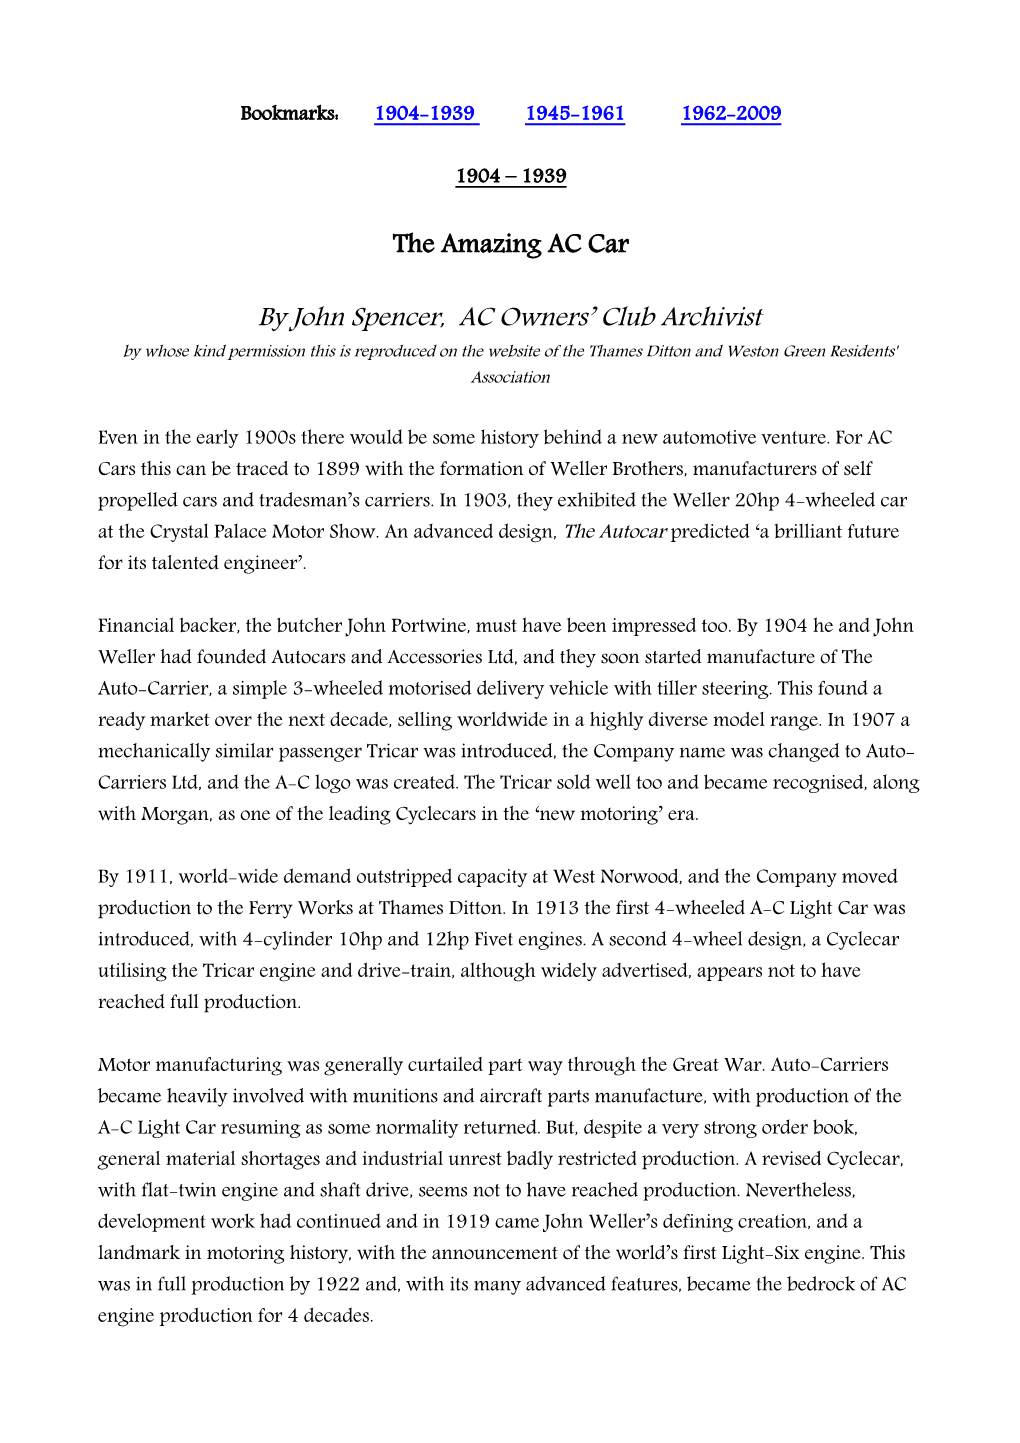 The Amazing AC Car by John Spencer, AC Owners' Club Archivist